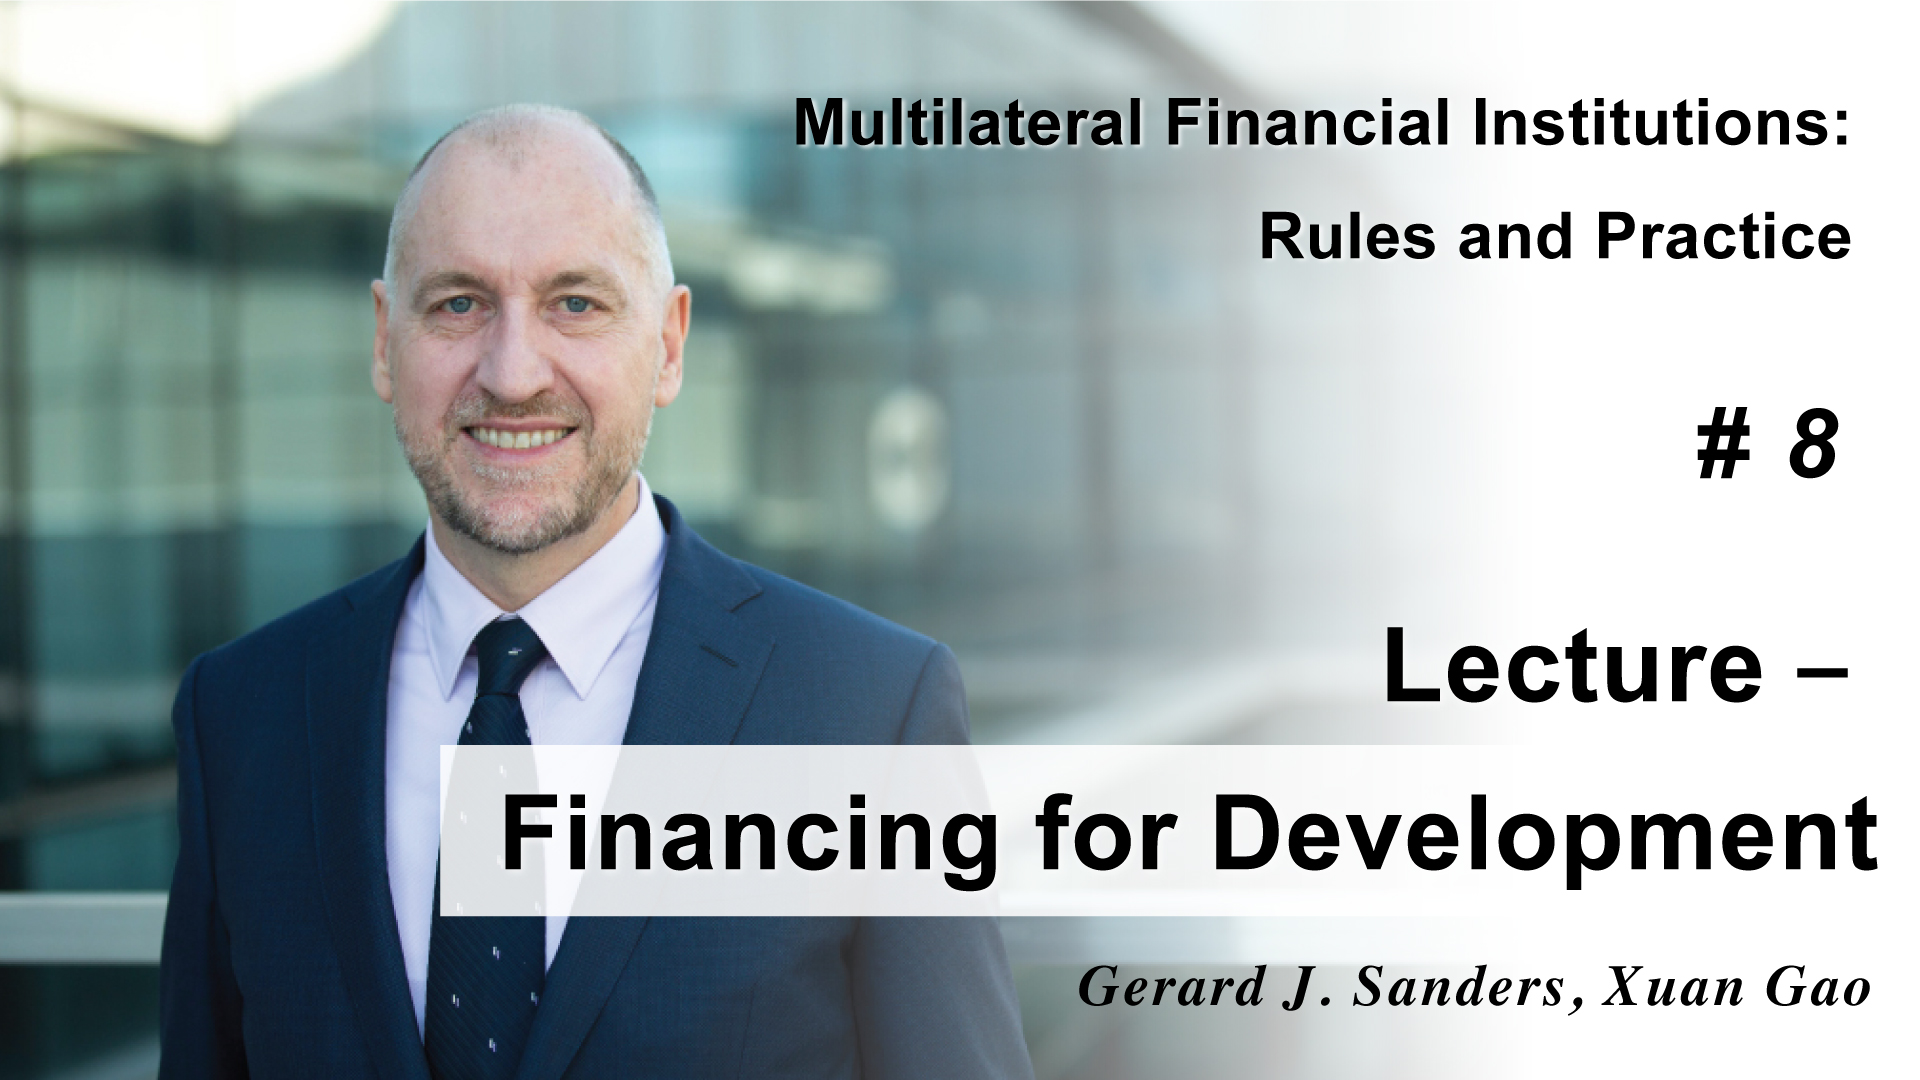 Lecture - Financing for Development 